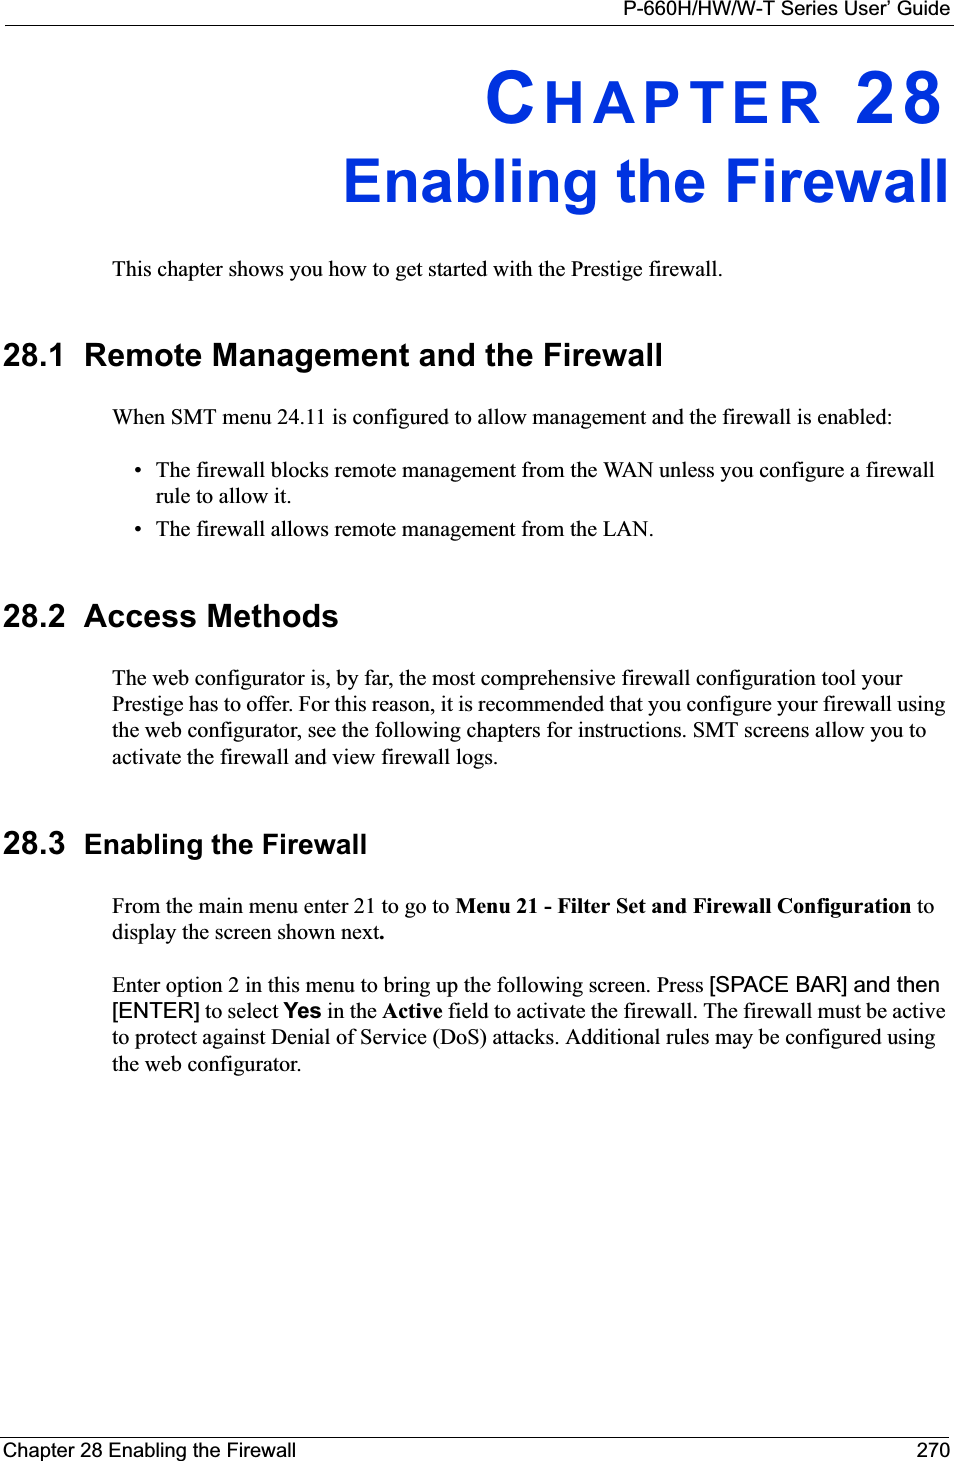 P-660H/HW/W-T Series User’ GuideChapter 28 Enabling the Firewall 270CHAPTER 28Enabling the FirewallThis chapter shows you how to get started with the Prestige firewall.28.1  Remote Management and the FirewallWhen SMT menu 24.11 is configured to allow management and the firewall is enabled:• The firewall blocks remote management from the WAN unless you configure a firewall rule to allow it.• The firewall allows remote management from the LAN. 28.2  Access MethodsThe web configurator is, by far, the most comprehensive firewall configuration tool your Prestige has to offer. For this reason, it is recommended that you configure your firewall using the web configurator, see the following chapters for instructions. SMT screens allow you to activate the firewall and view firewall logs. 28.3 Enabling the FirewallFrom the main menu enter 21 to go to Menu 21 - Filter Set and Firewall Configuration todisplay the screen shown next.Enter option 2 in this menu to bring up the following screen. Press [SPACE BAR] and then [ENTER] to select Yes in the Active field to activate the firewall. The firewall must be active to protect against Denial of Service (DoS) attacks. Additional rules may be configured using the web configurator.